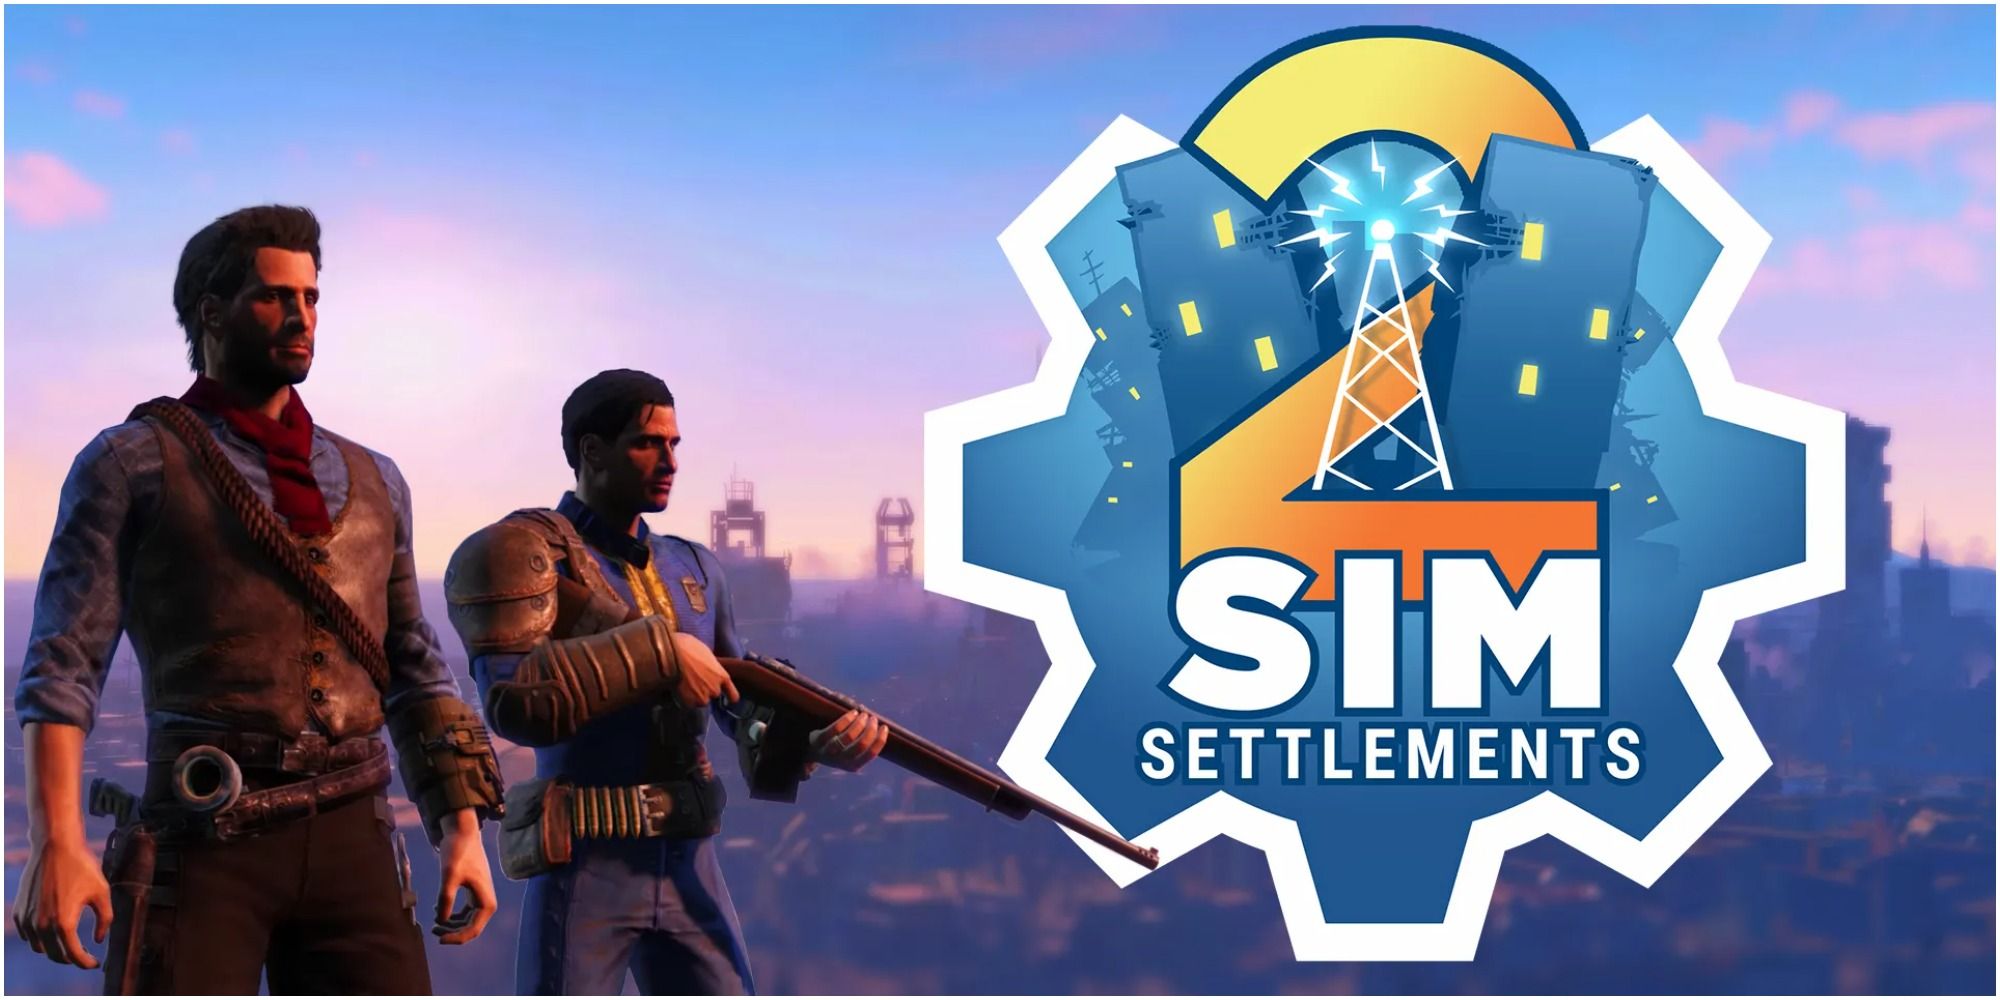 The Sim Settlements 2 mod for Fallout 4